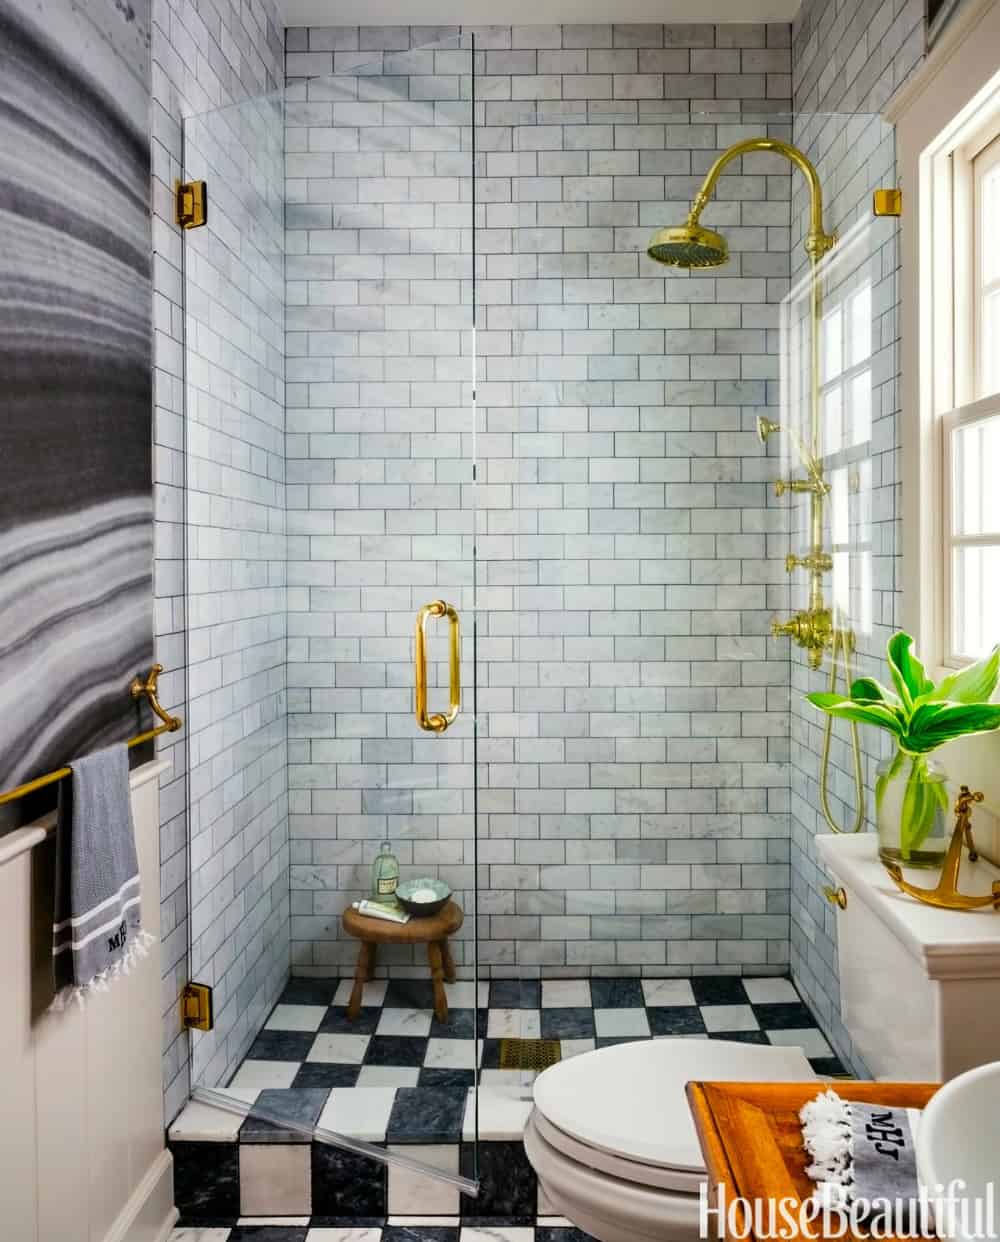 Marble subway tiles in a small shower